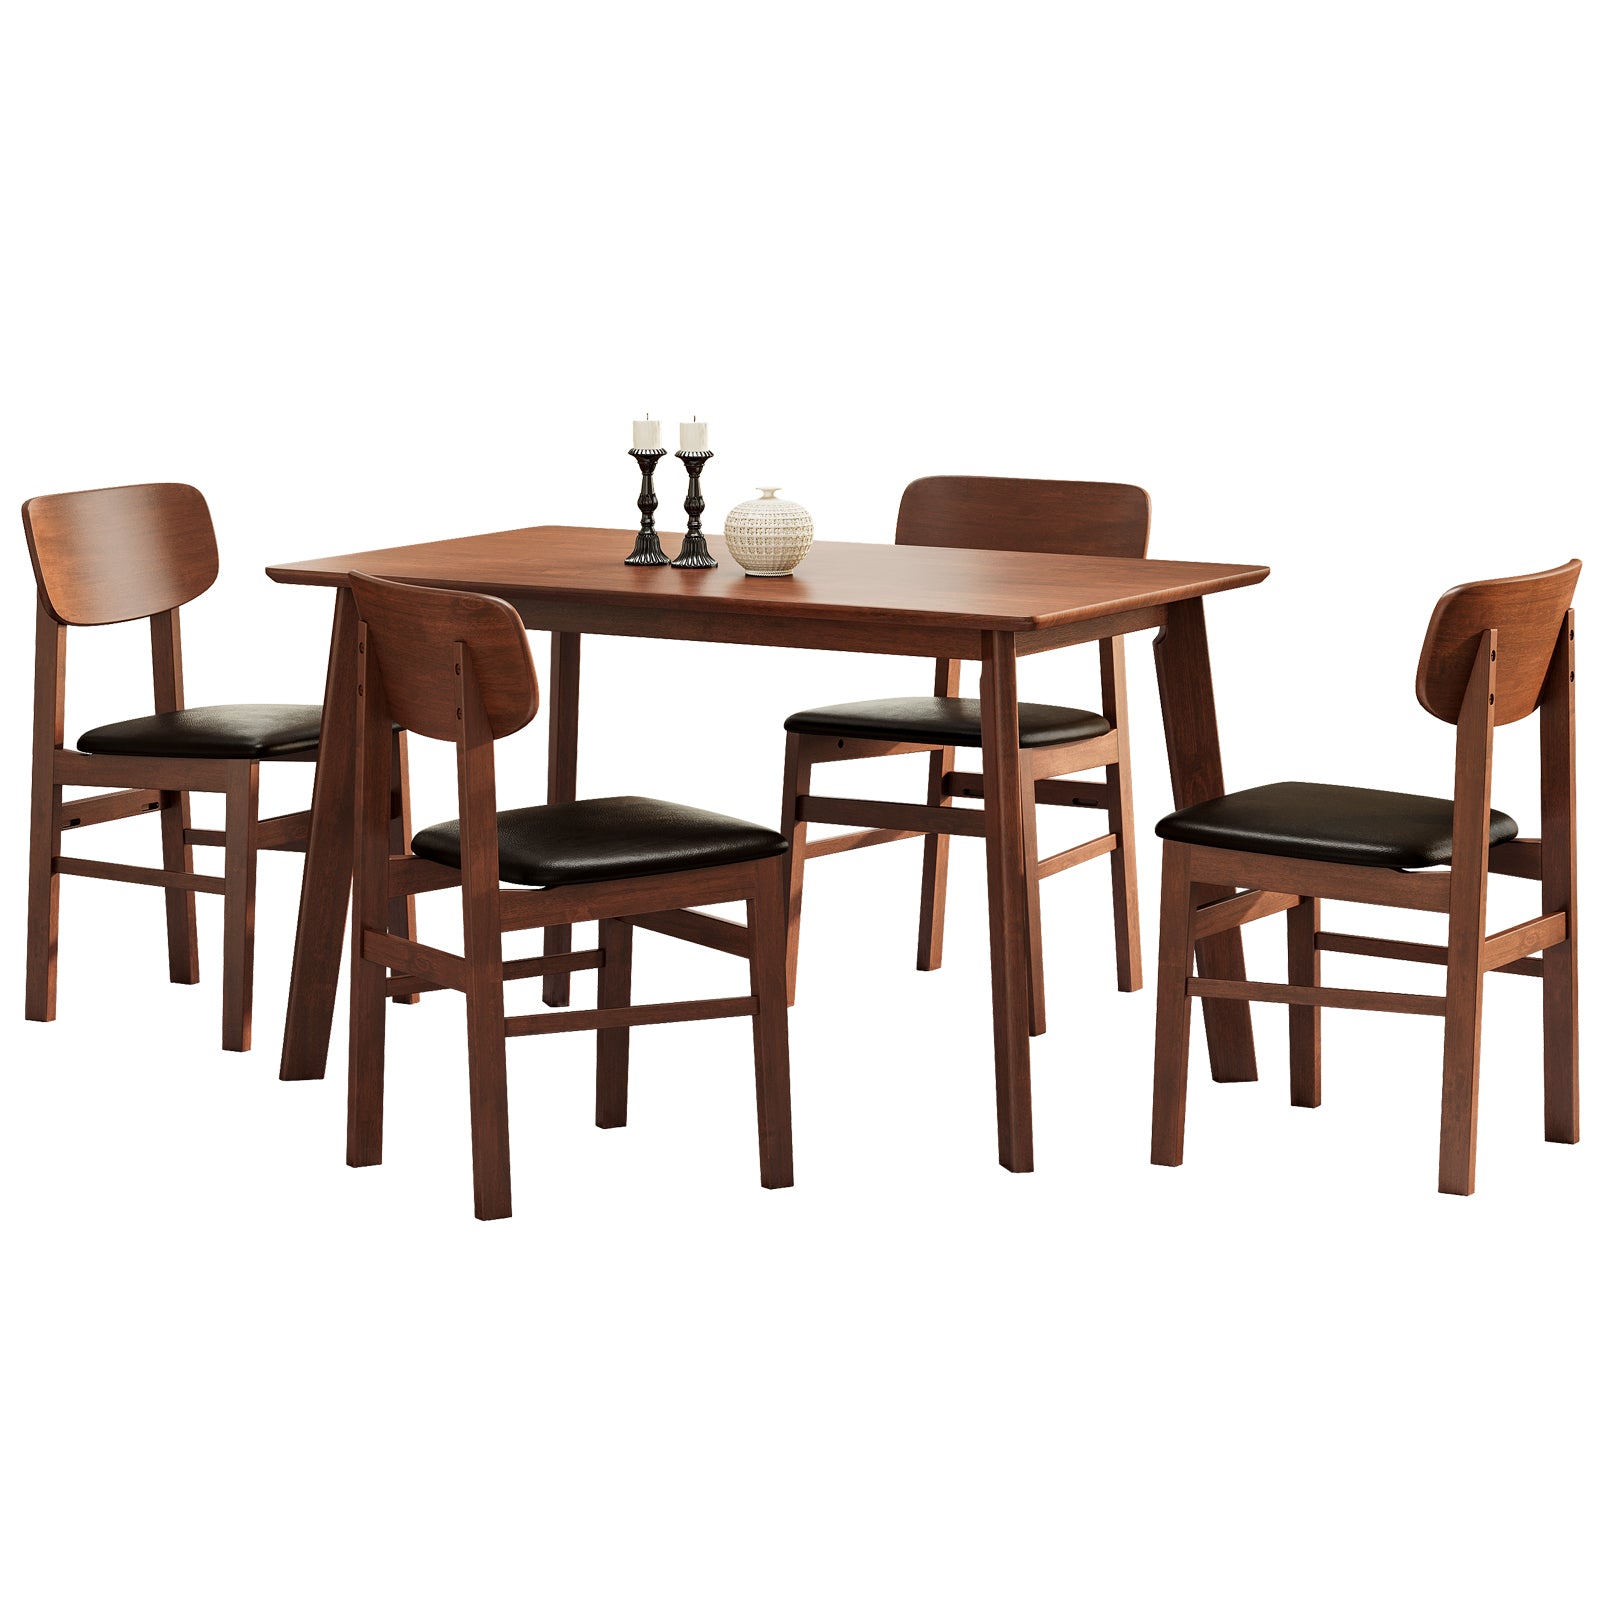 Bellemave® 5-Pieces Rustic Retro Solid RubberWood Dining Table Set,1 Dining Table and 4 Chairs Bellemave®